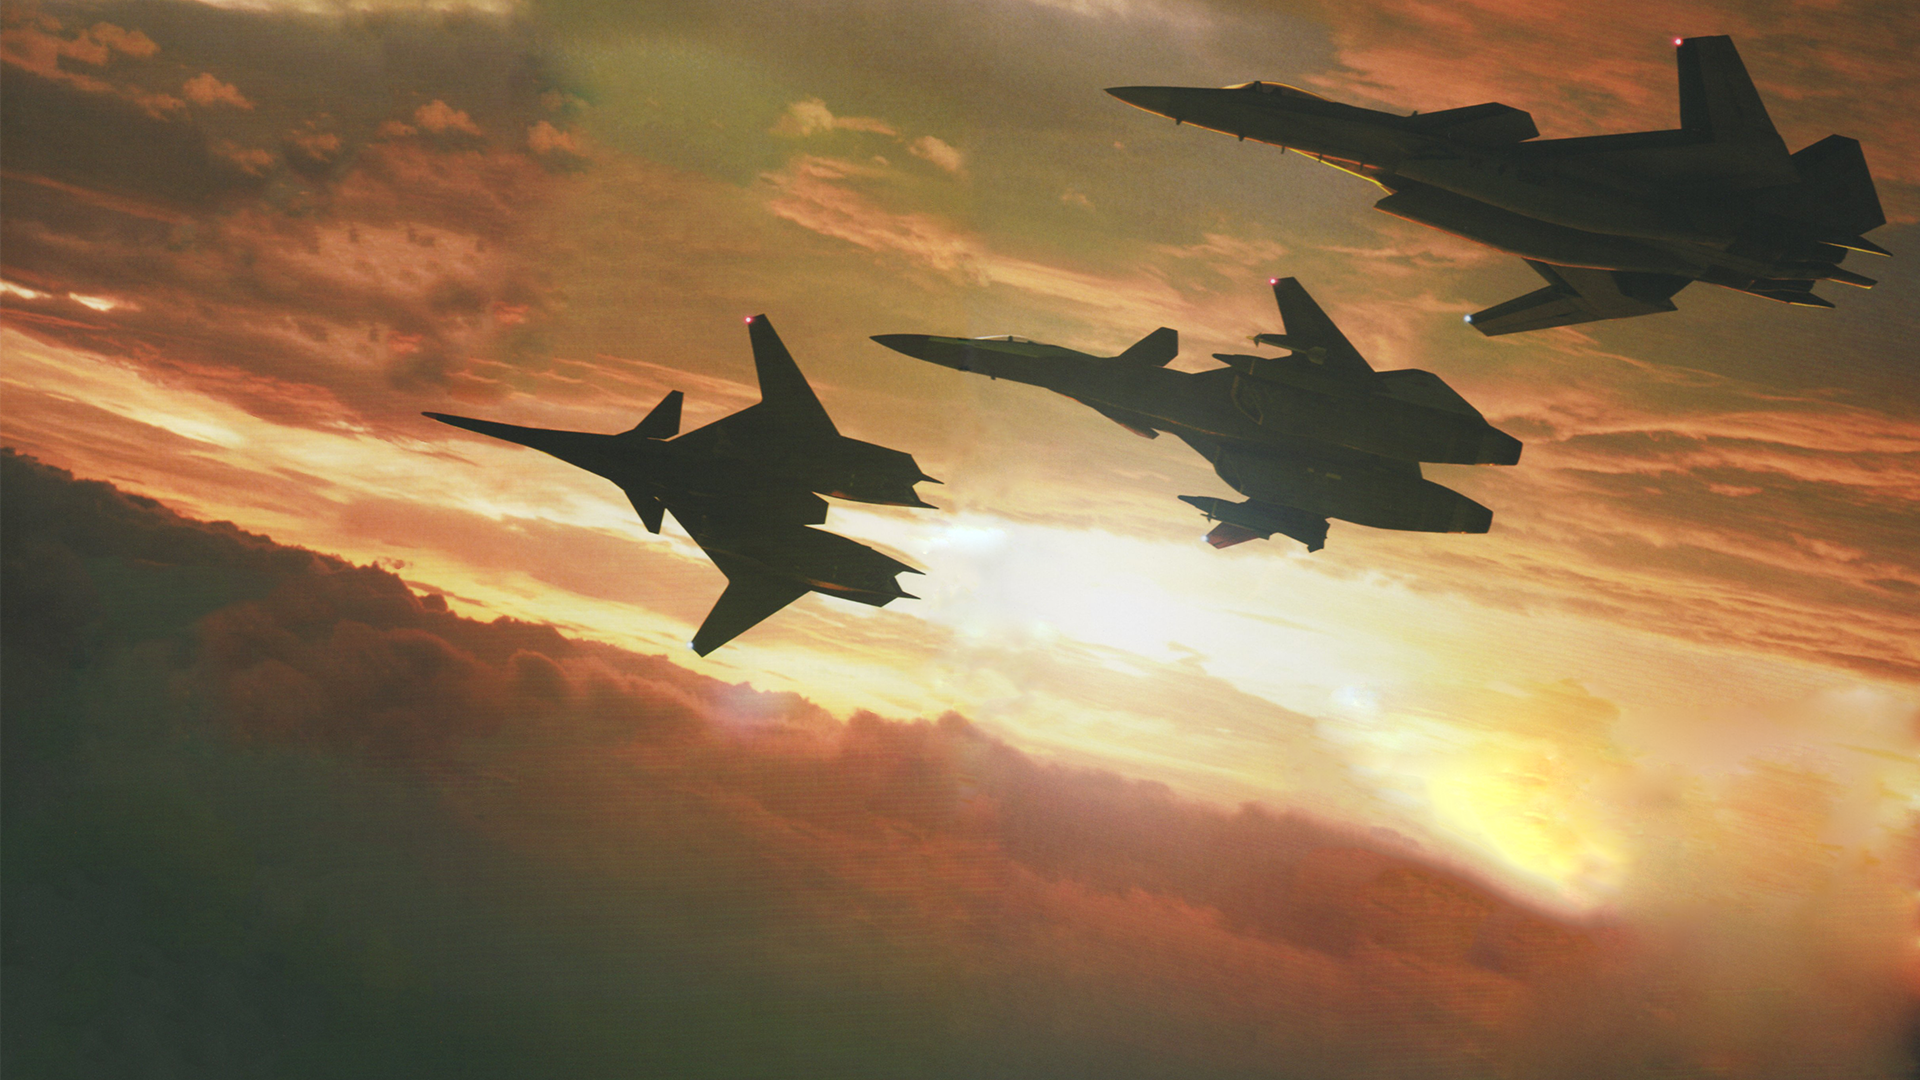 Some Ace Combat Wallpaper